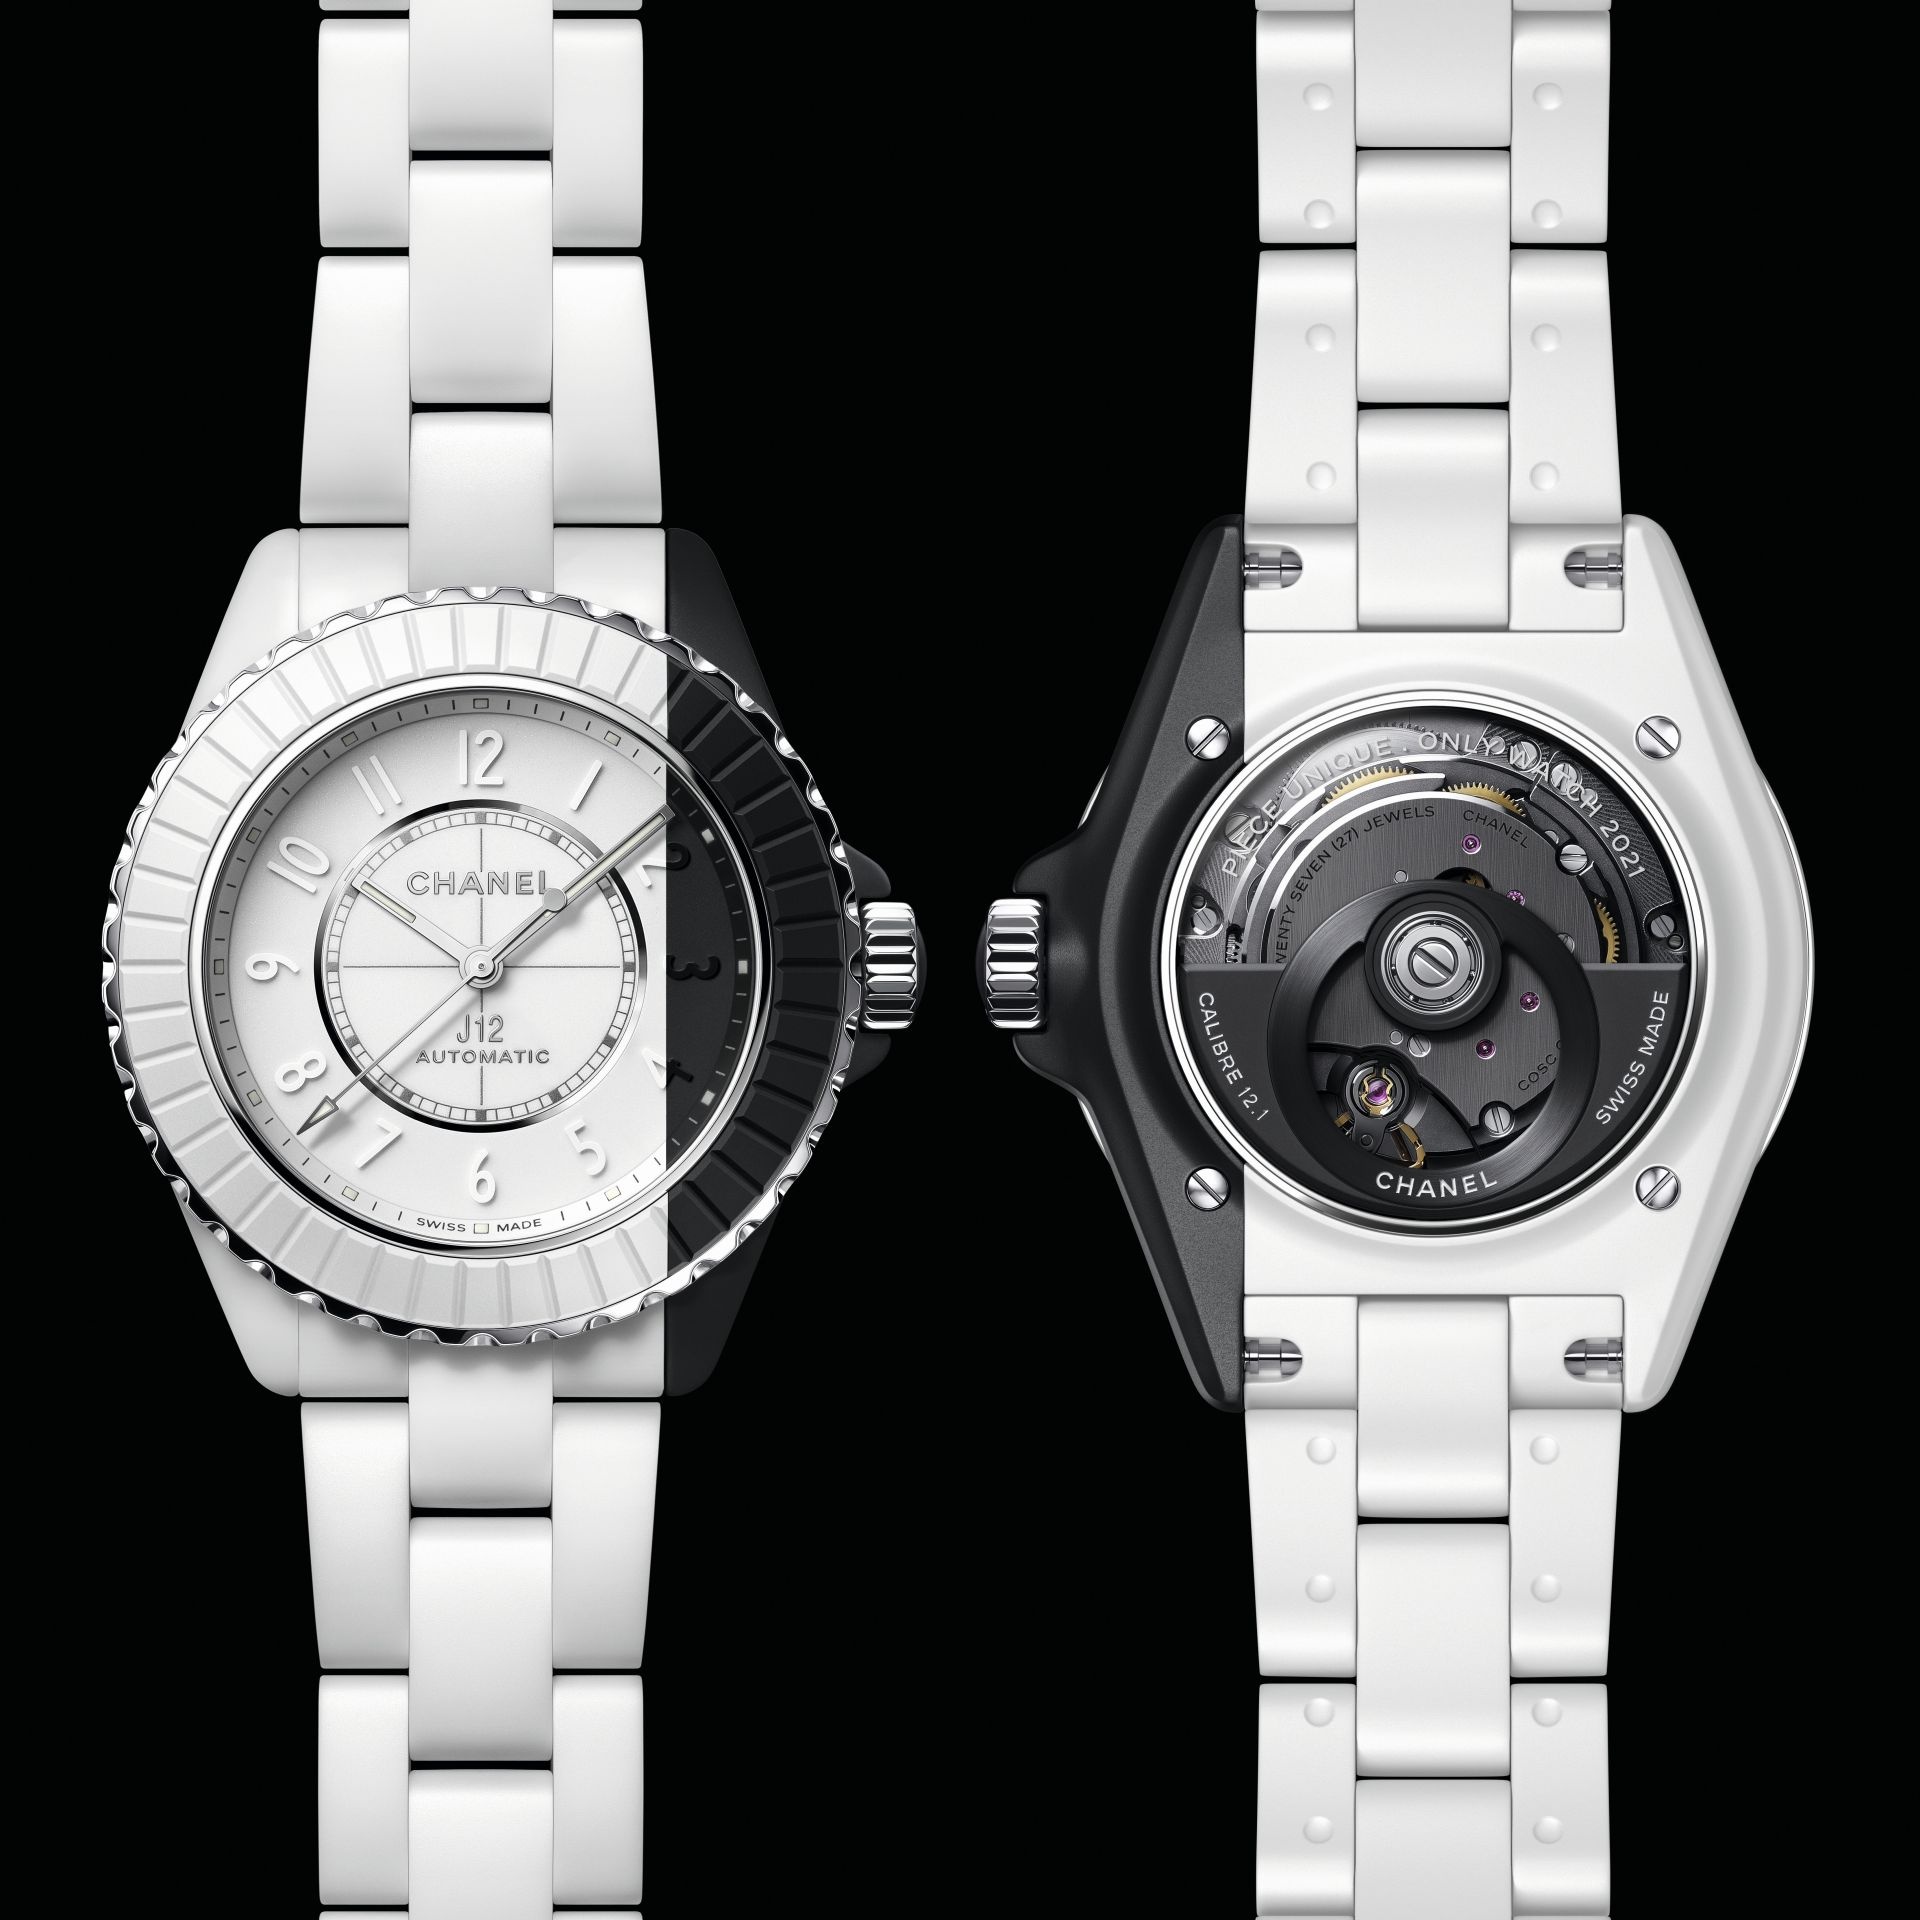 Chanel j12 paradoxe watch #Chanel #Watches